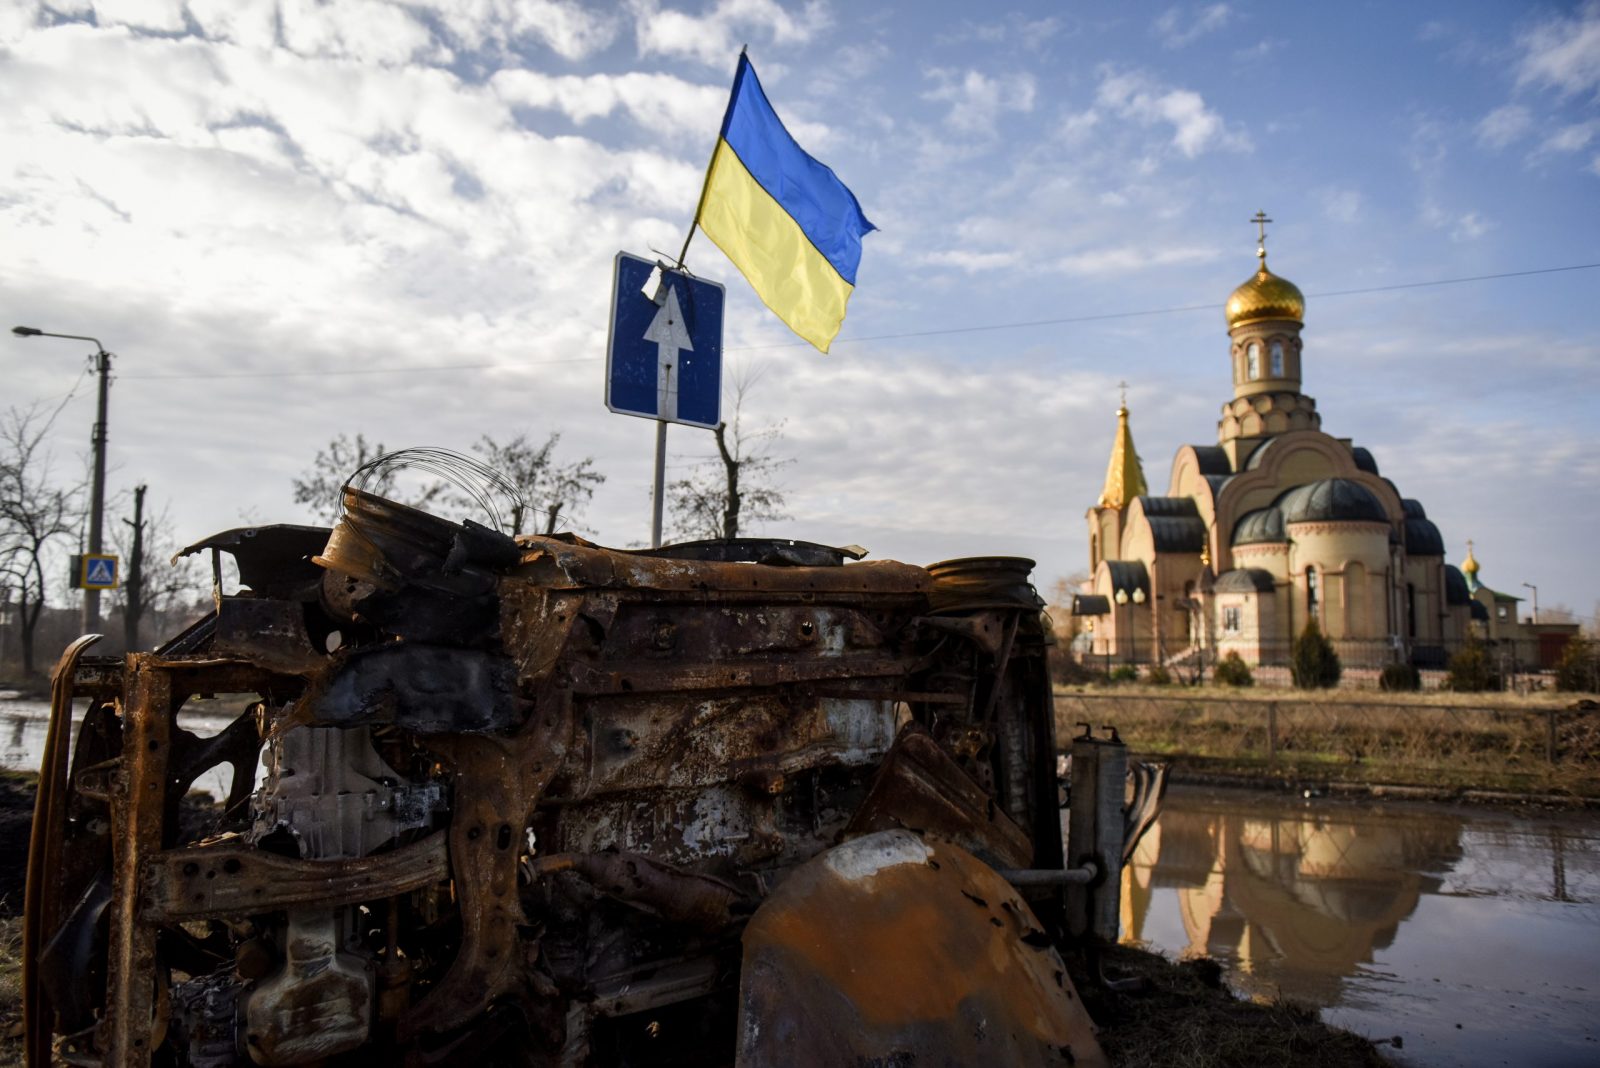 epa10416126 A Ukrainian flag posted on the wreckage of a motor vehicle in Bakhmut, Donetsk region, eastern Ukraine, 19 January 2023. Ukrainian authorities are urging residents to evacuate from the frontline territories, though some 8,000 have chosen to stay in their homes. There is no working infrastructure left - no electricity, heating, water or gas. Also the risk to be injured or killed by Russian shelling remains high, so that people mostly spend their time in shelters or basements. Russian troops entered Ukraine on 24 February 2022 starting a conflict that has provoked destruction and a humanitarian crisis.  EPA/OLEG PETRASYUK